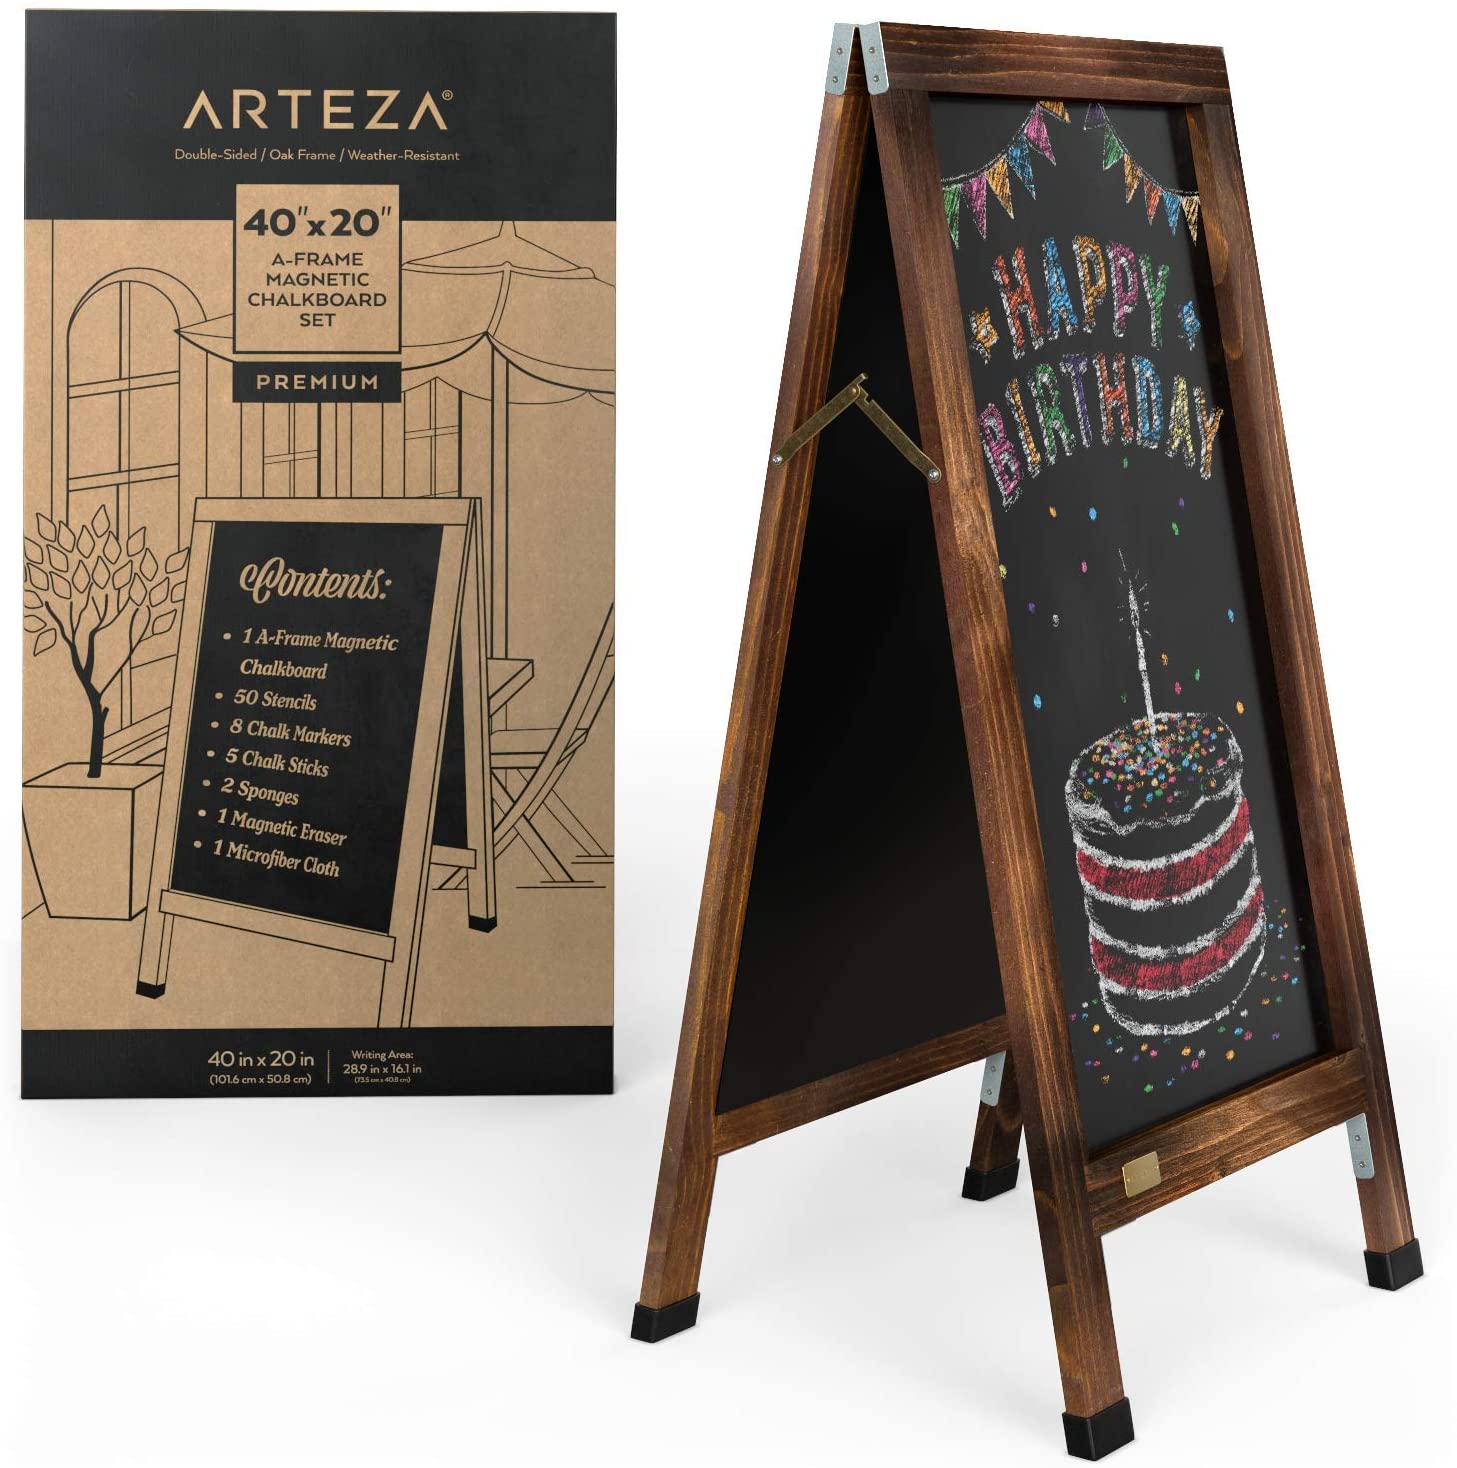 Drawing with chalk: Best techniques for chalkboard signs – Retail